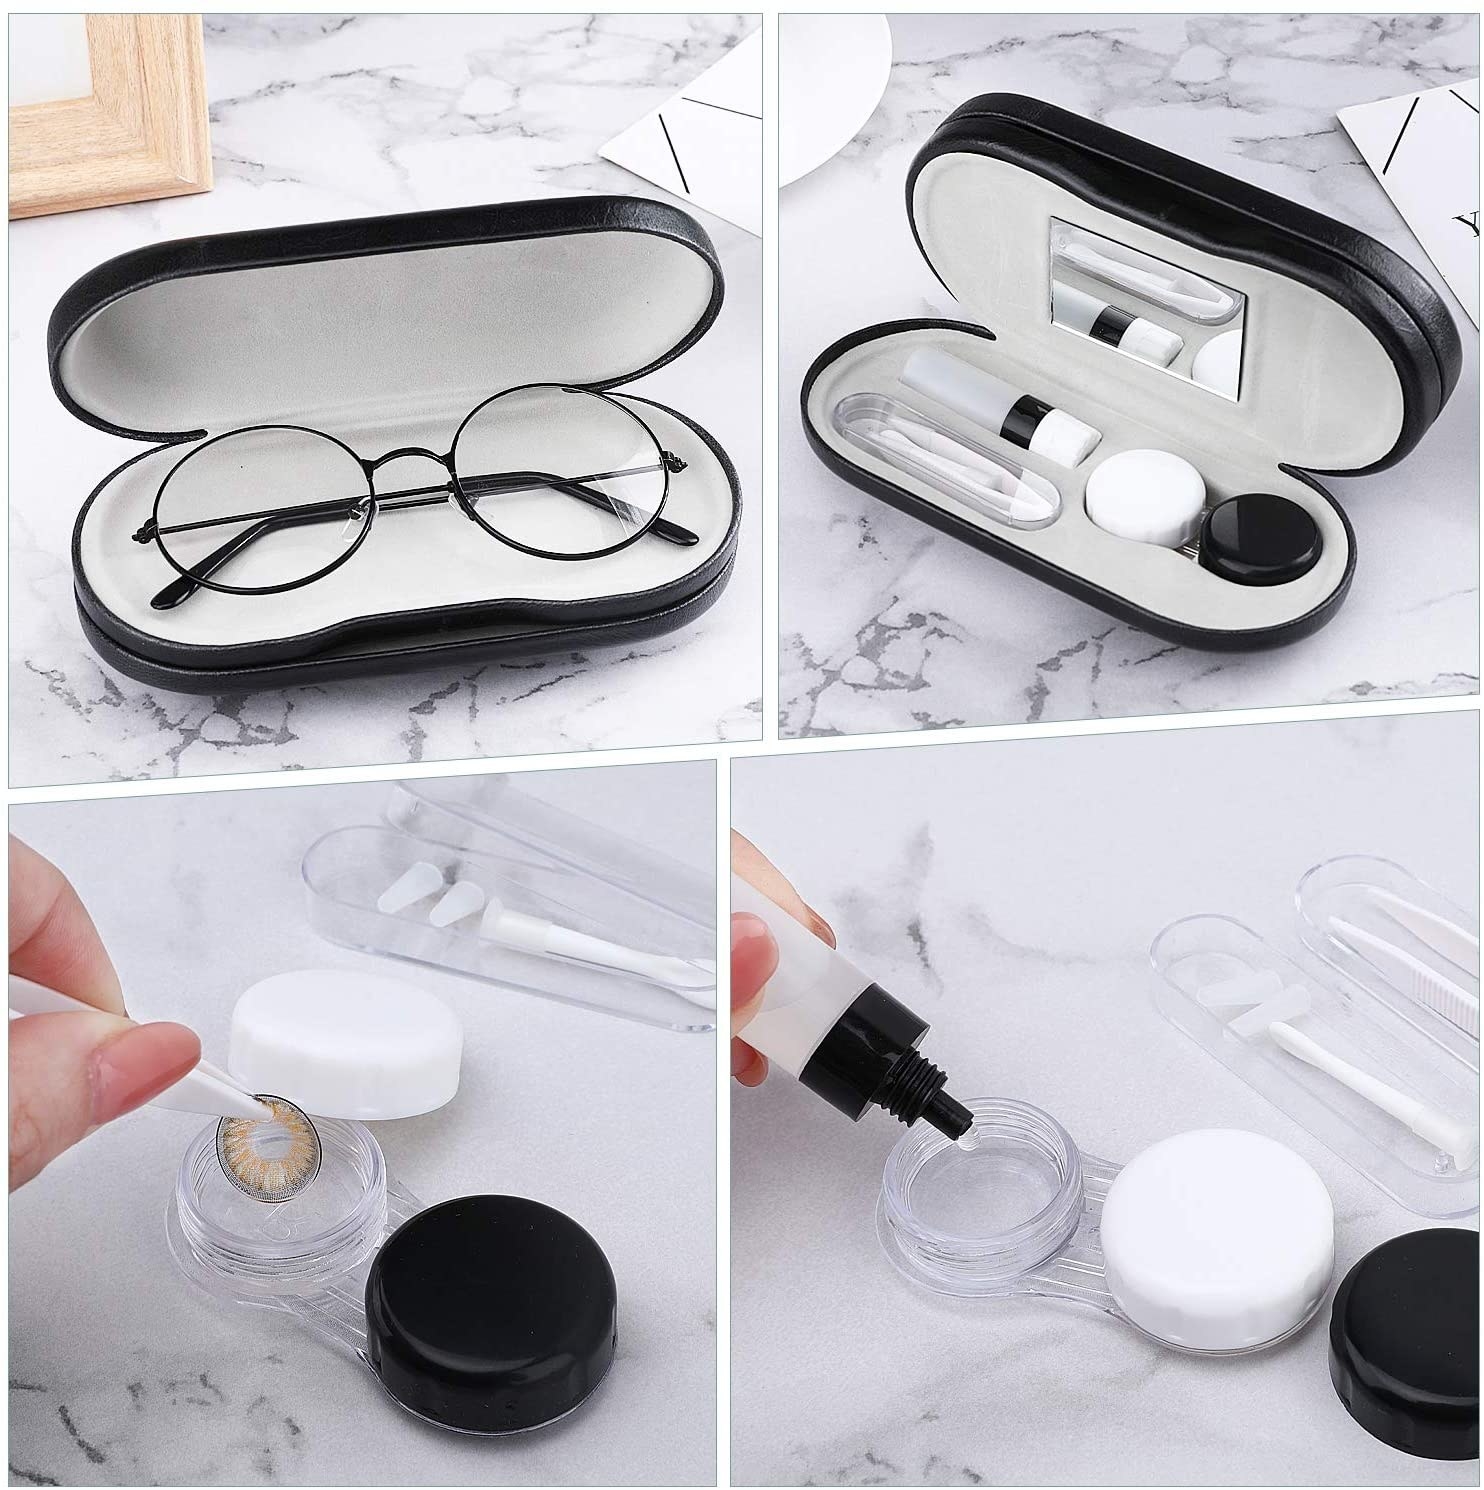 the case showing glasses and then the contact side and the contact accessories